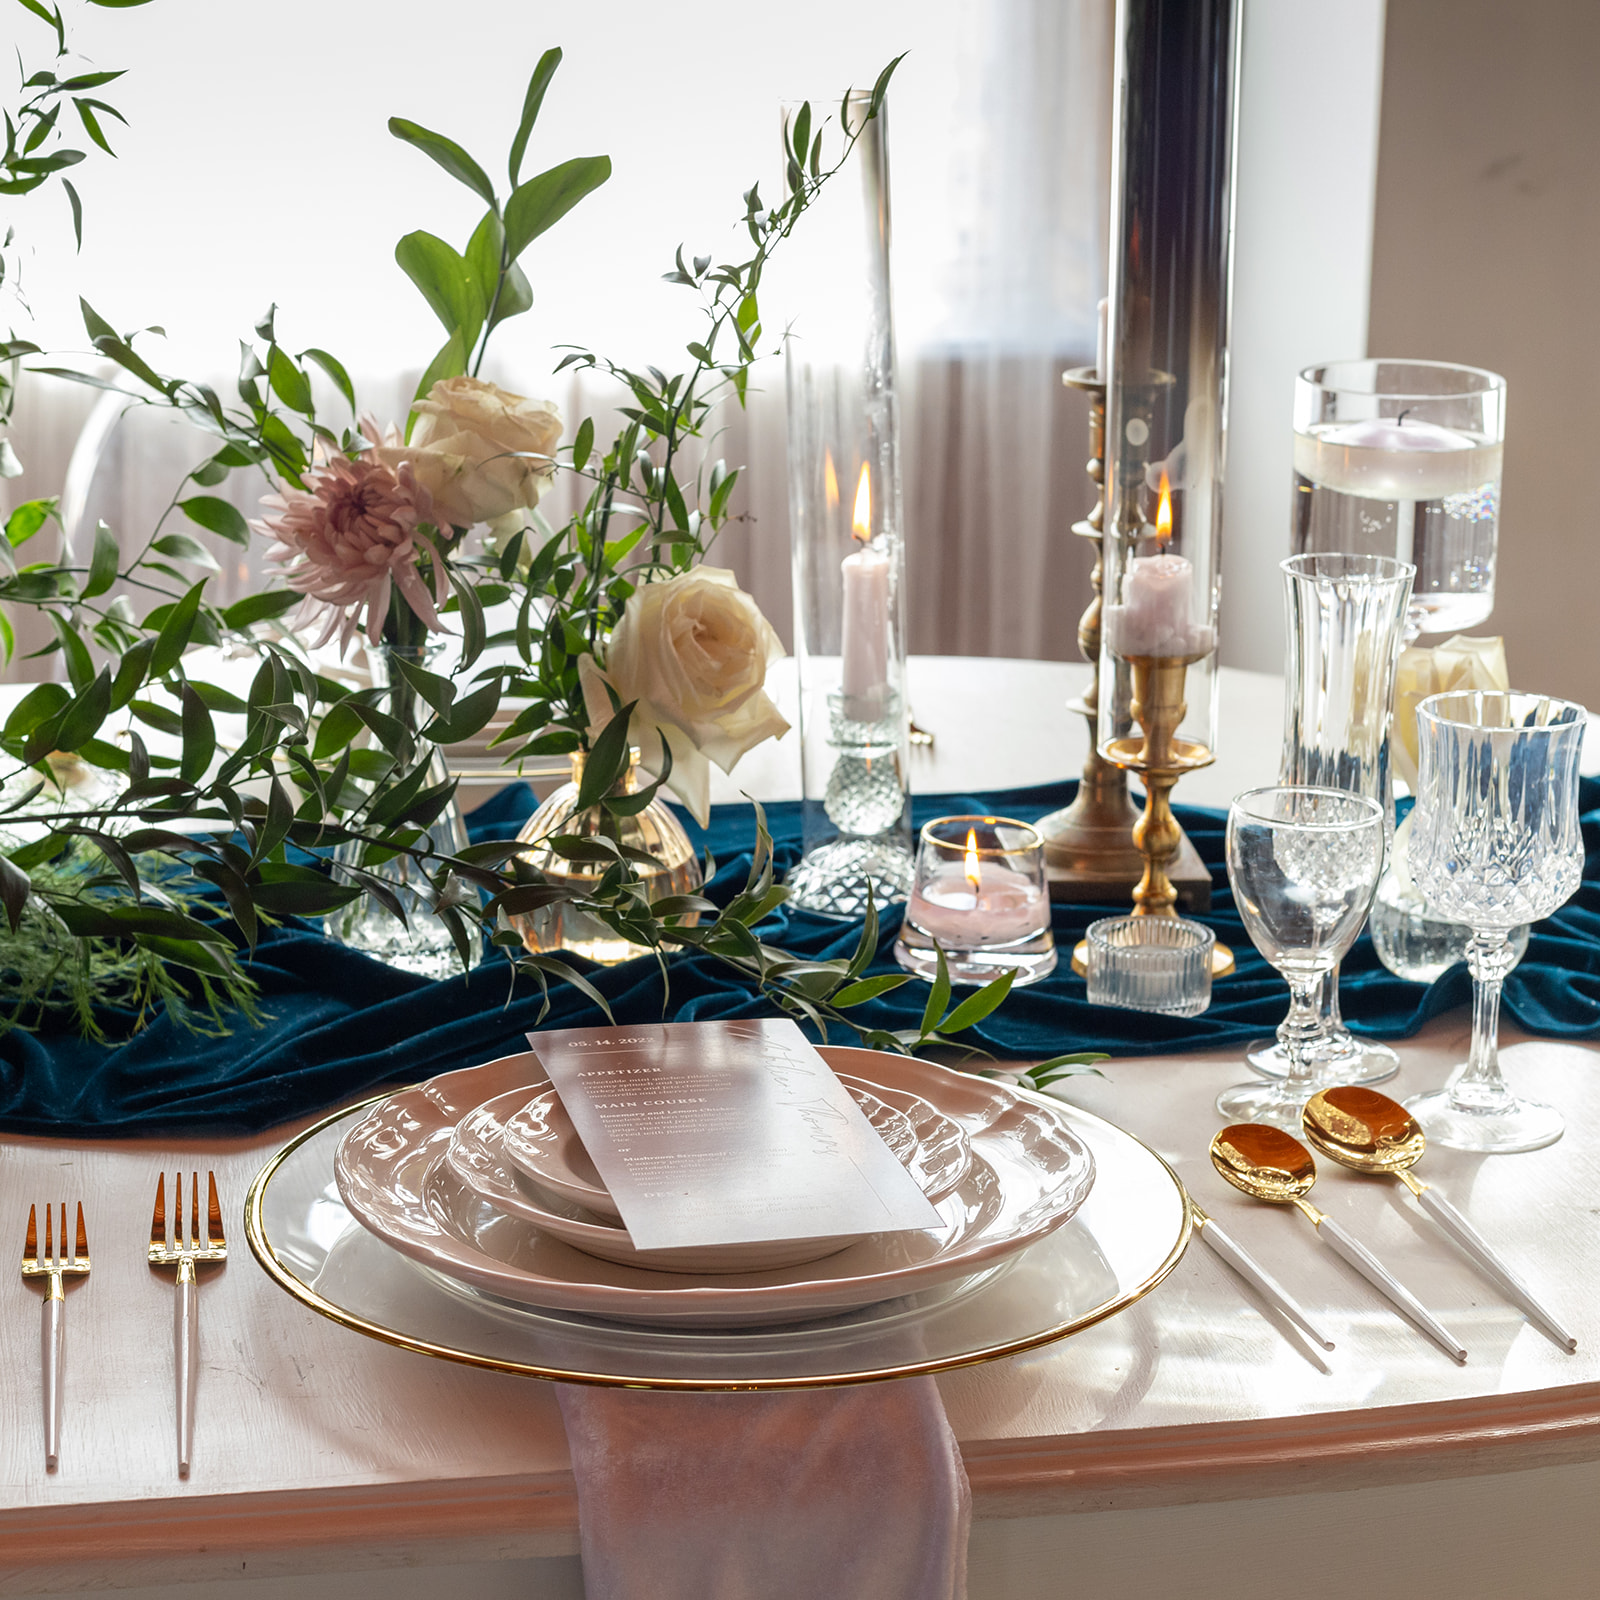 The decorated table with the place setting and dishware for the wedding.